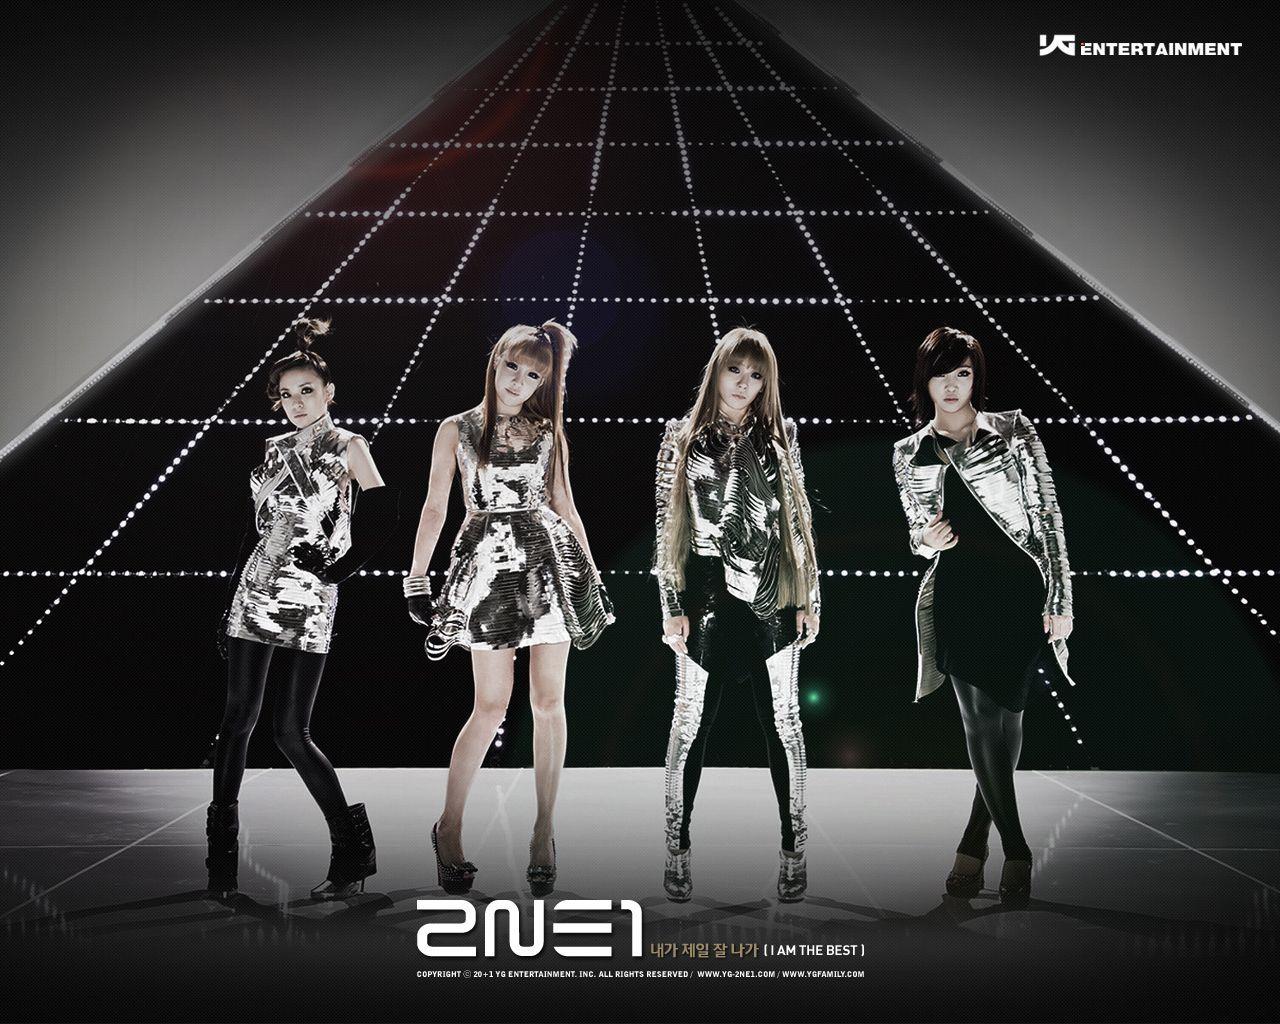 2NE1 HD wallpaper. Most beautiful places in the world. Download